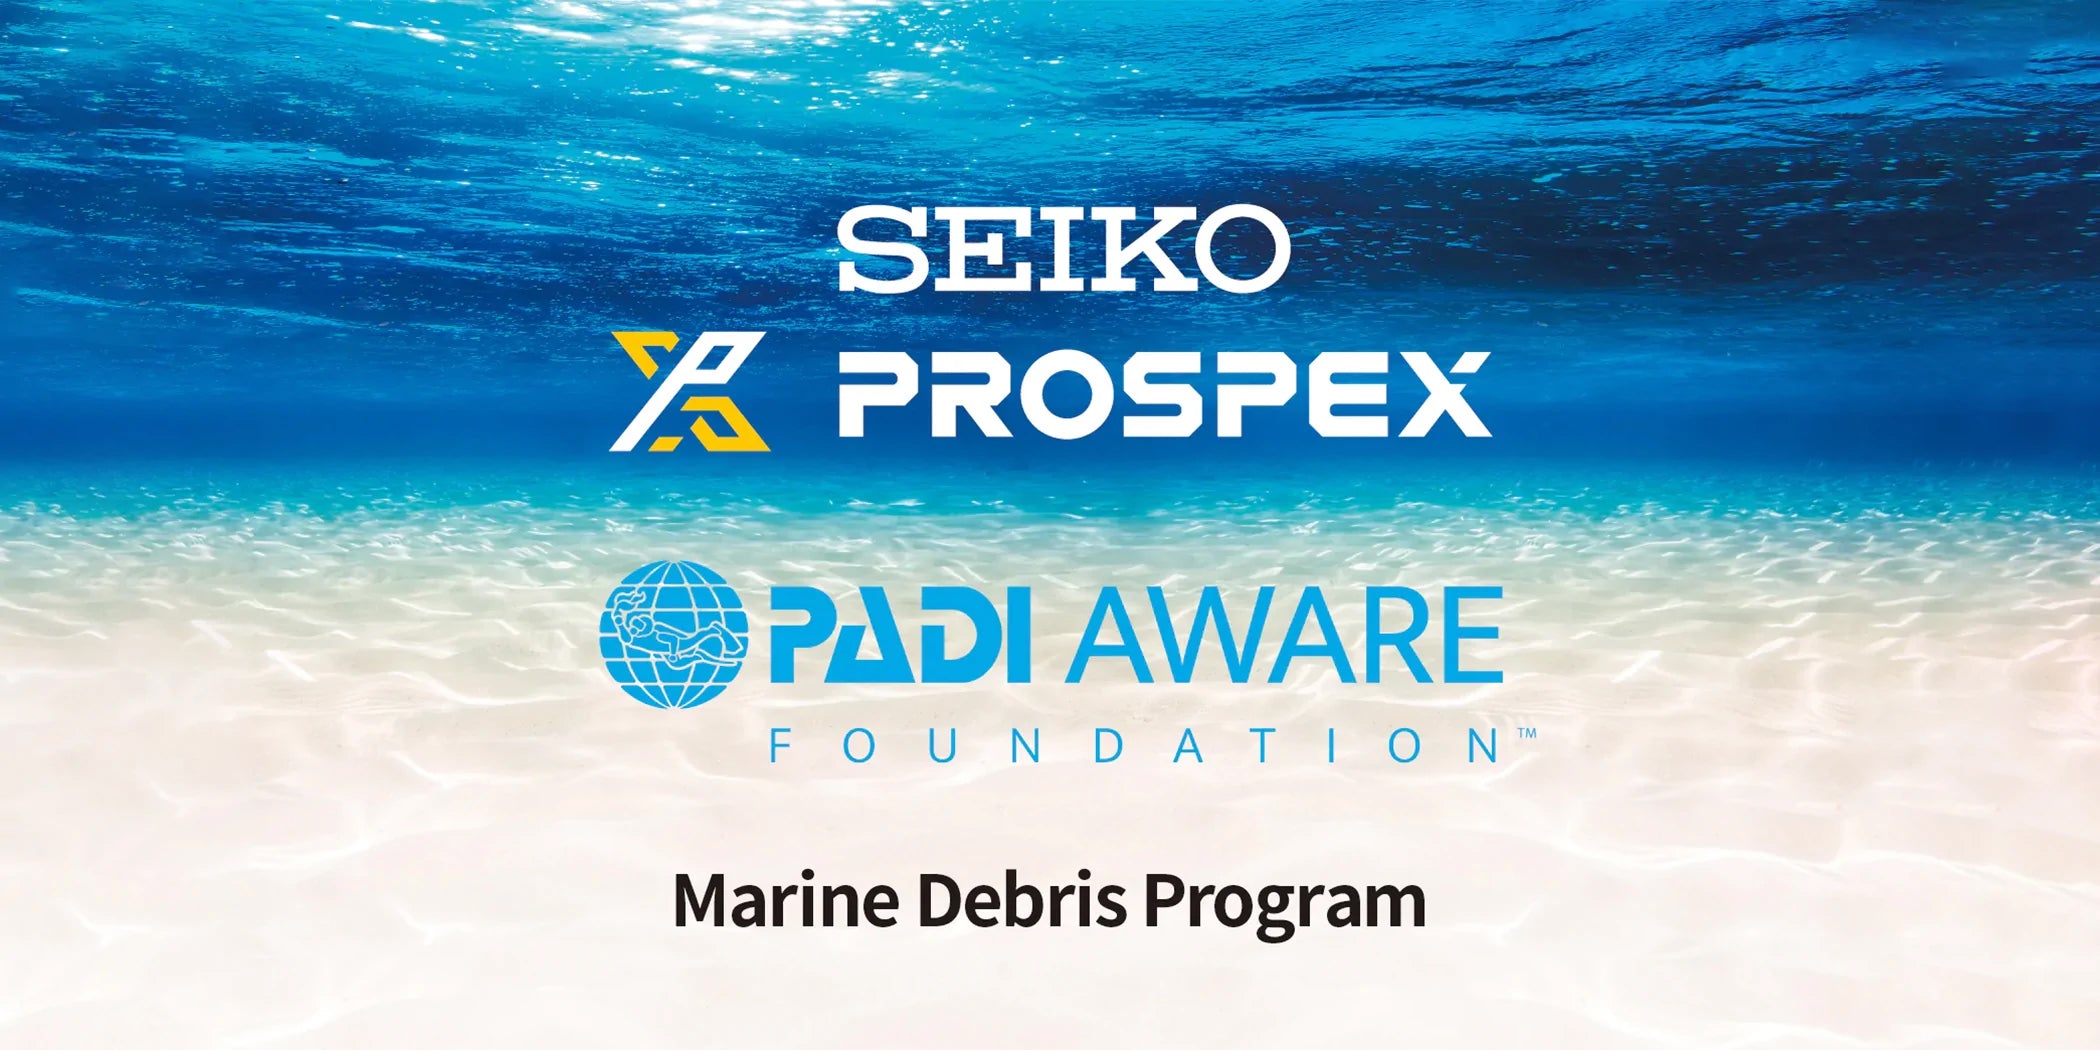 Seiko joins forces with PADI and PADI AWARE Foundation to protect the ocean world.